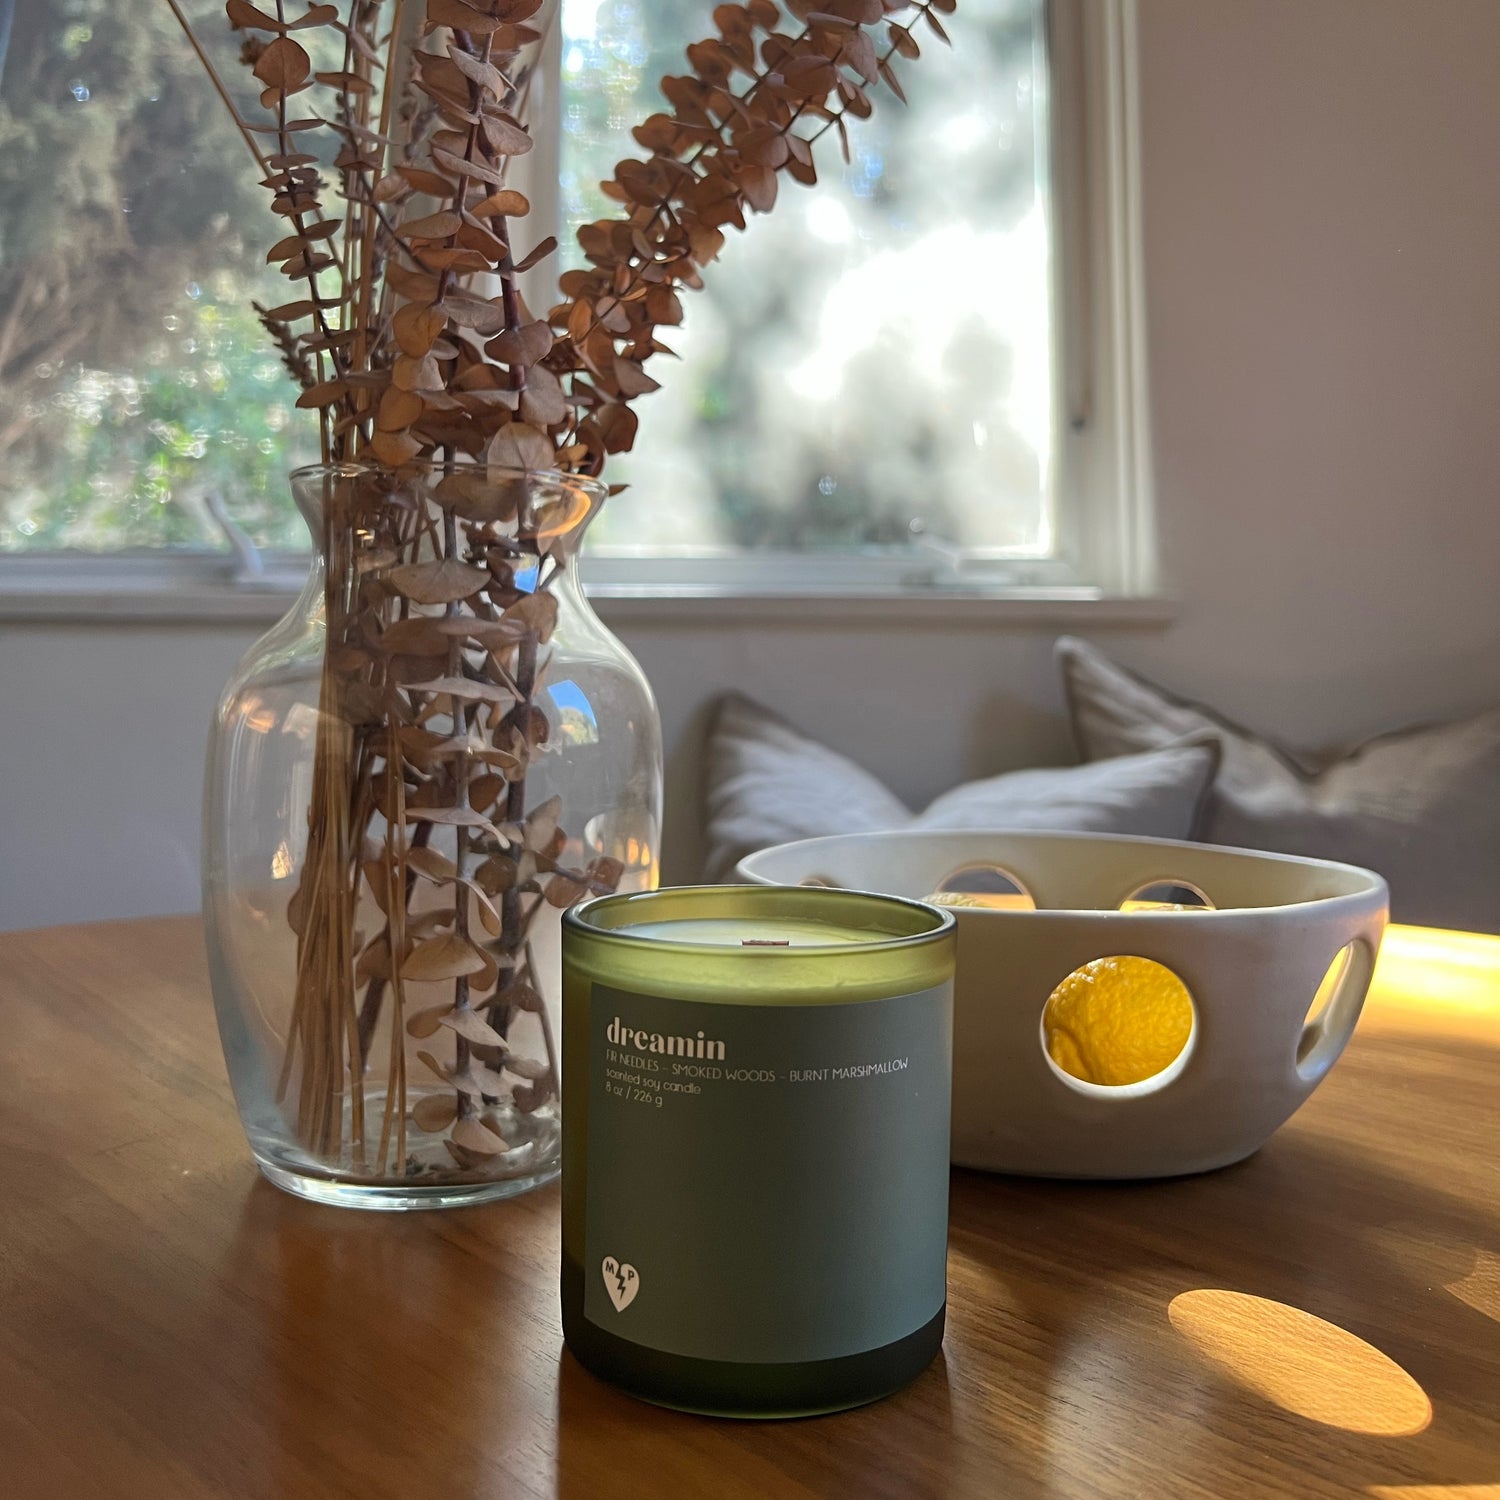 image of a table in front of a window. on the table there is a brown plant on the left in a glass vase, green candle in the center, and a bowl on the right with cut out holes and a lemon inside. 